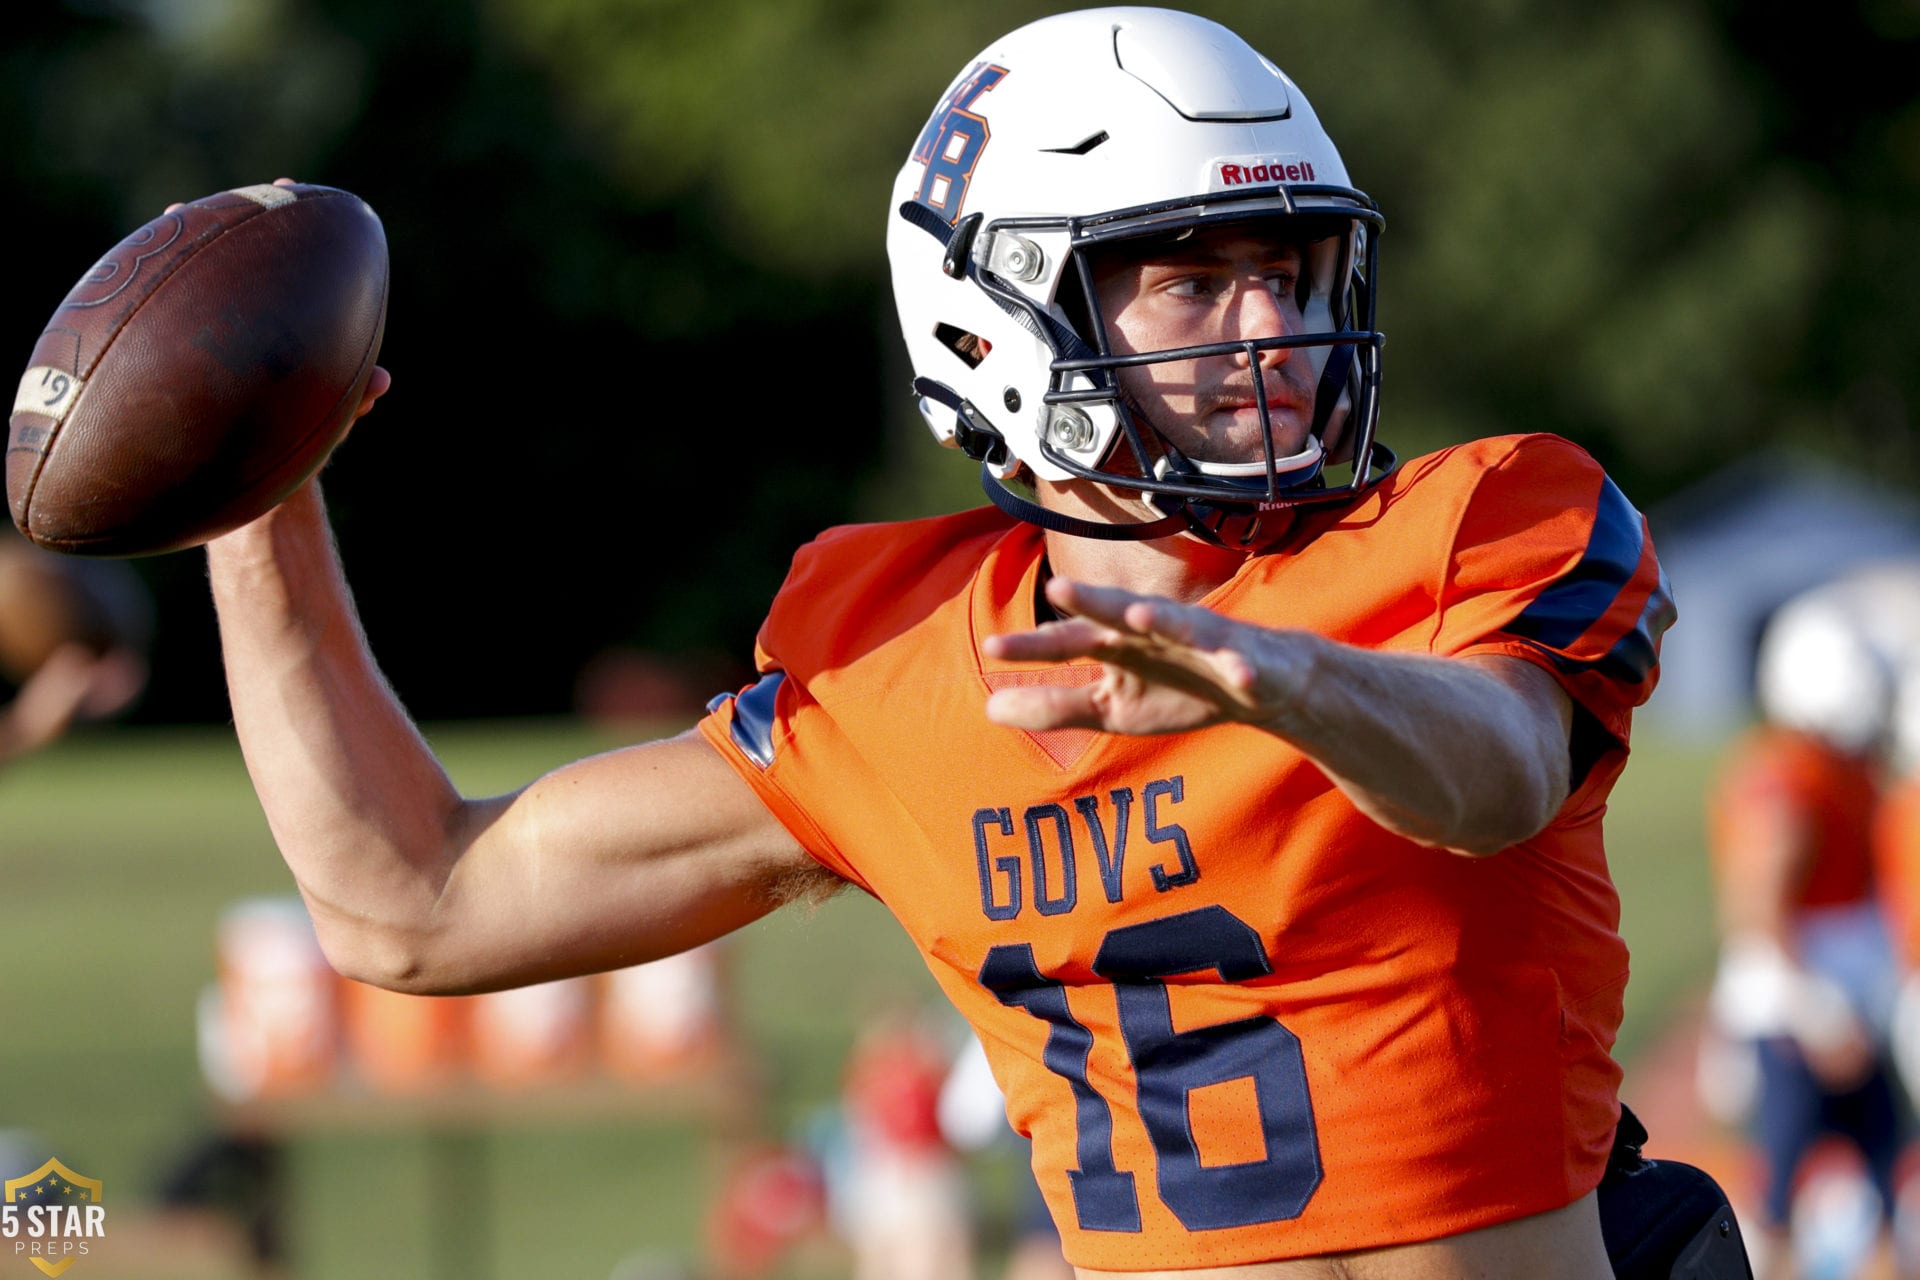 The NEW QB1s William Blount football QB1 duties to stay within the